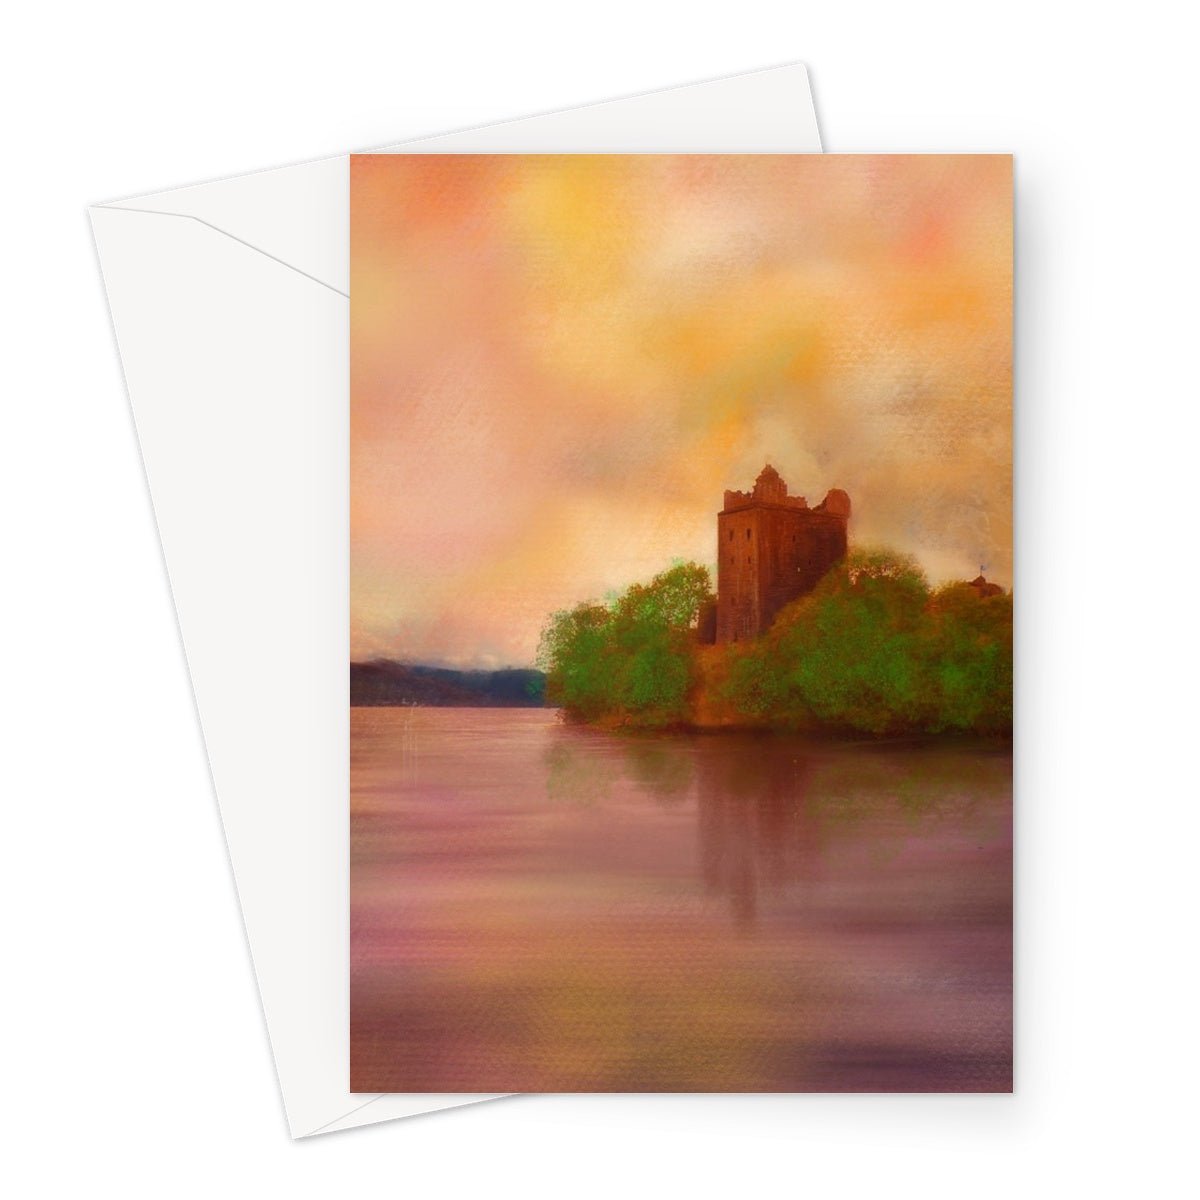 Urquhart Castle Art Gifts Greeting Card-Greetings Cards-Historic & Iconic Scotland Art Gallery-A5 Portrait-1 Card-Paintings, Prints, Homeware, Art Gifts From Scotland By Scottish Artist Kevin Hunter